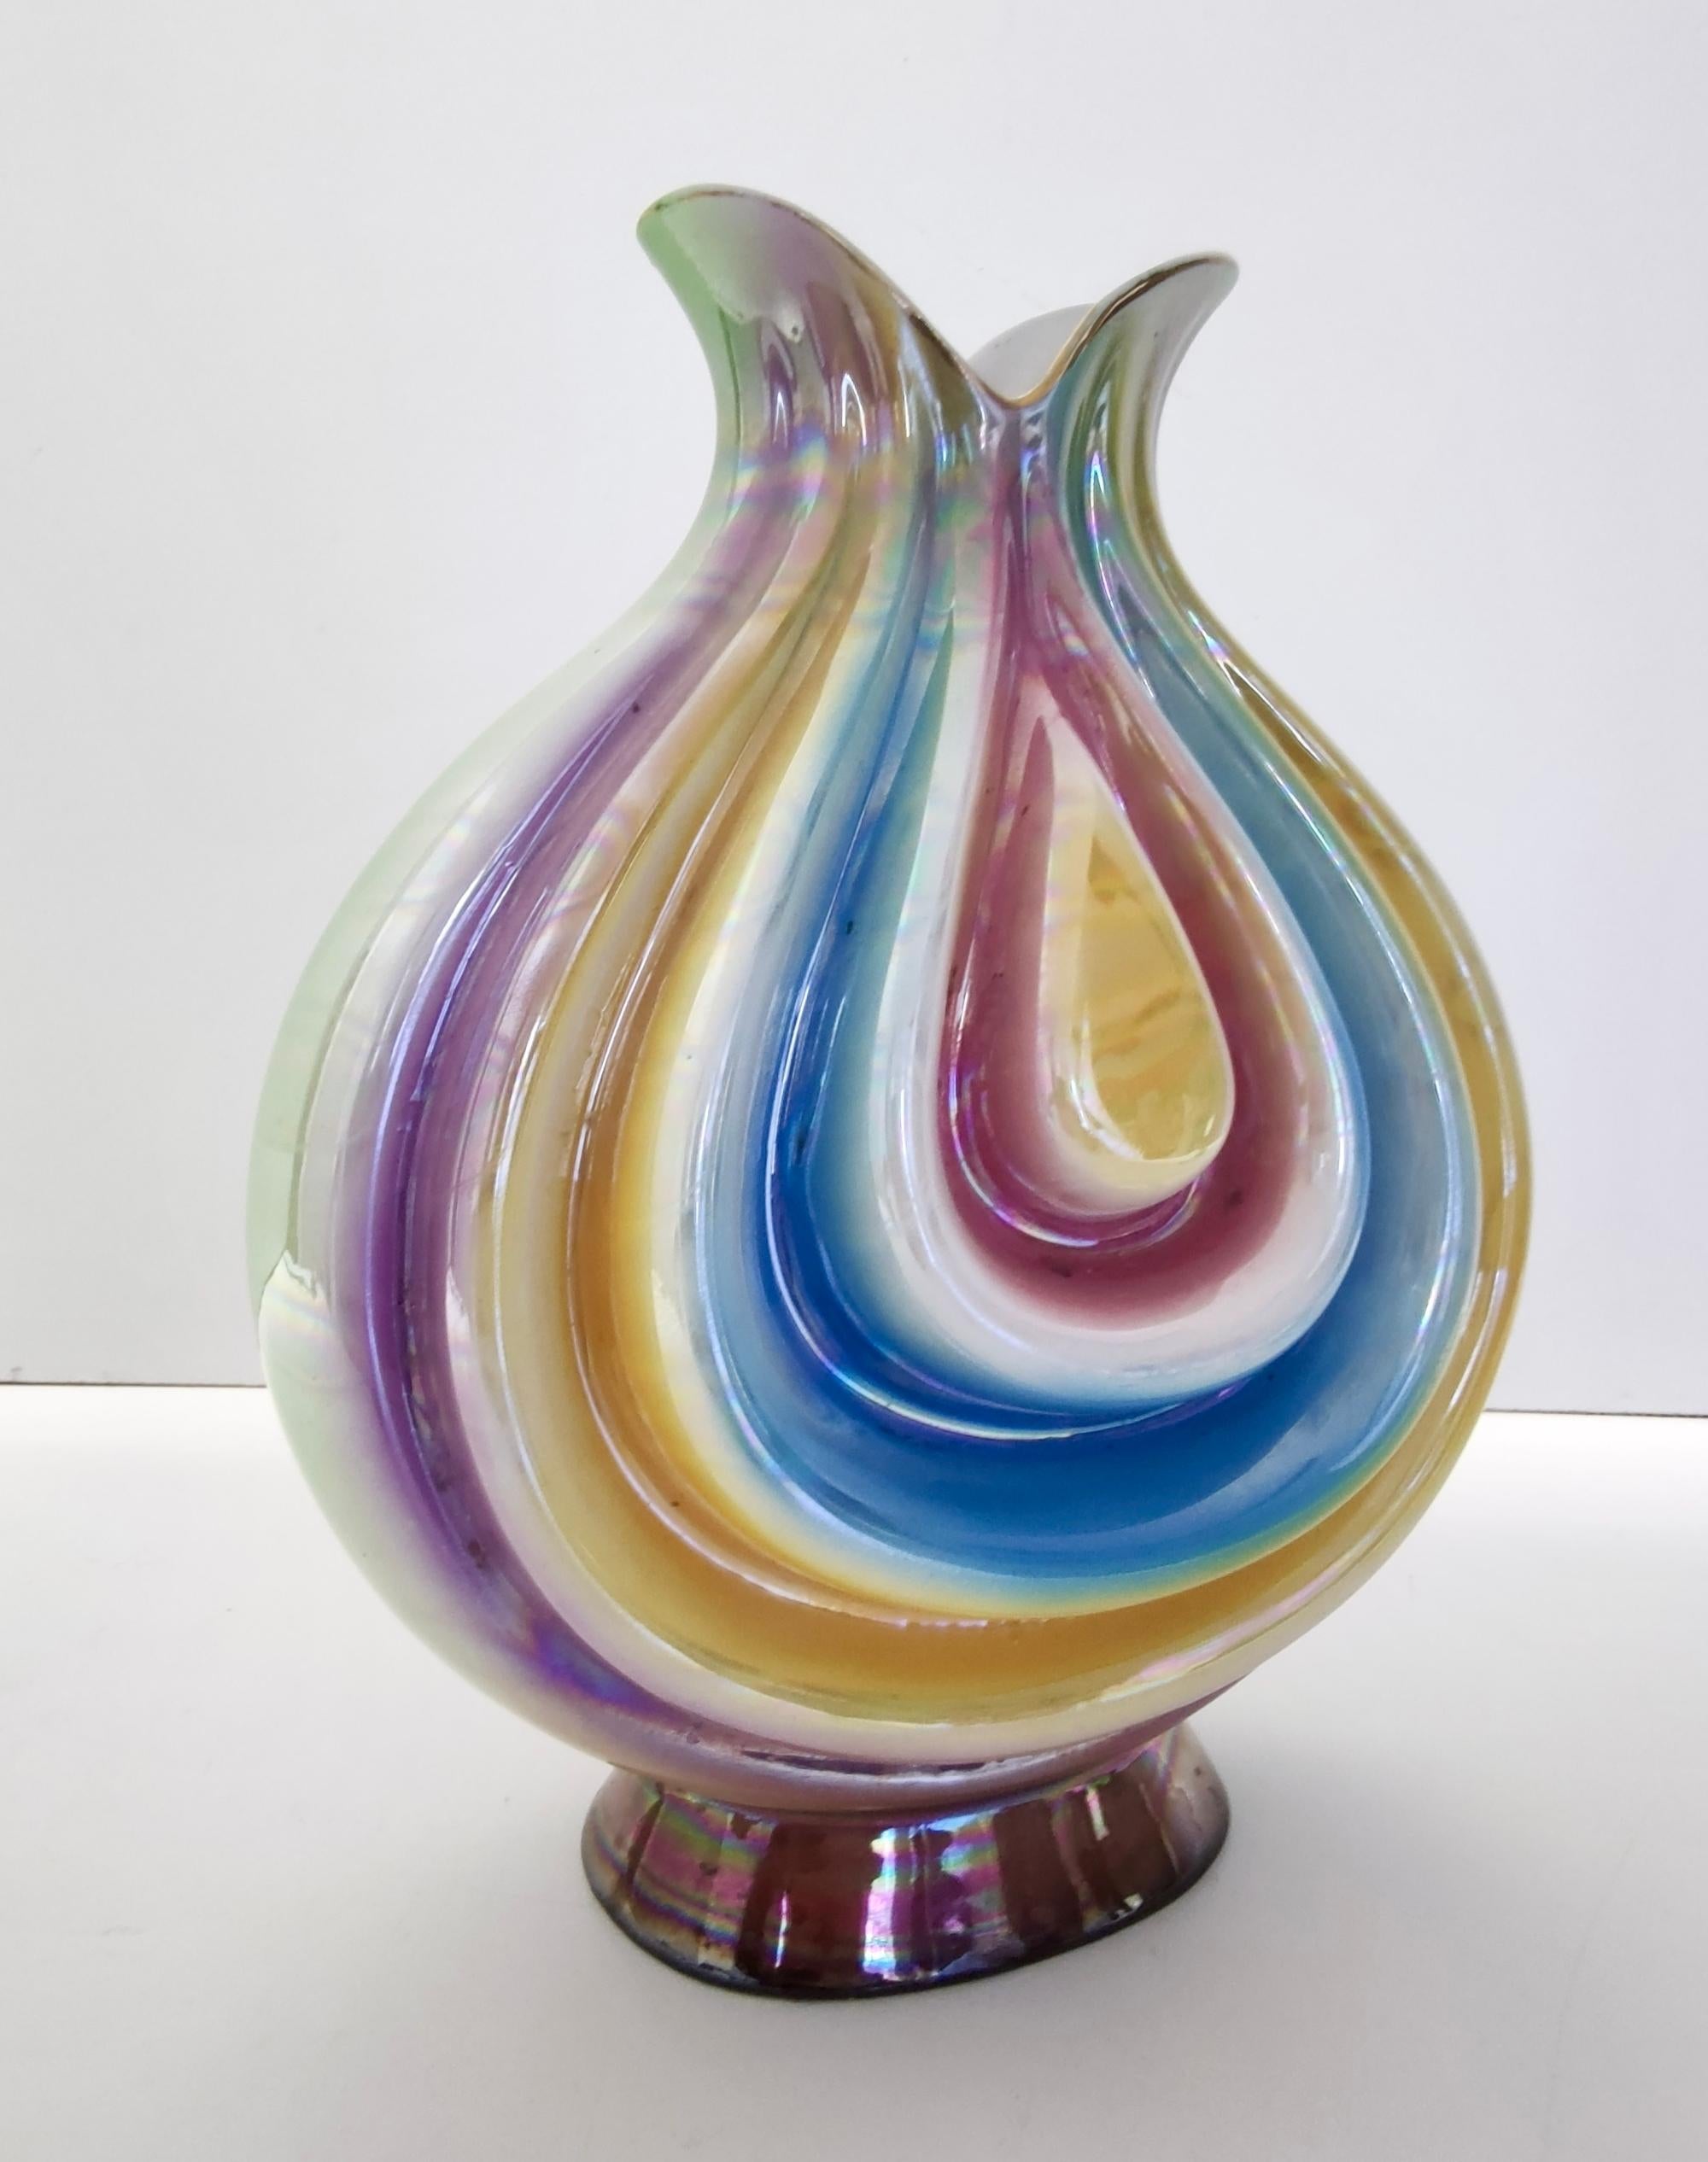 Lacquered Vintage Ceramic Vase Attributed to Italo Casini with Iridescent Colors, Italy For Sale